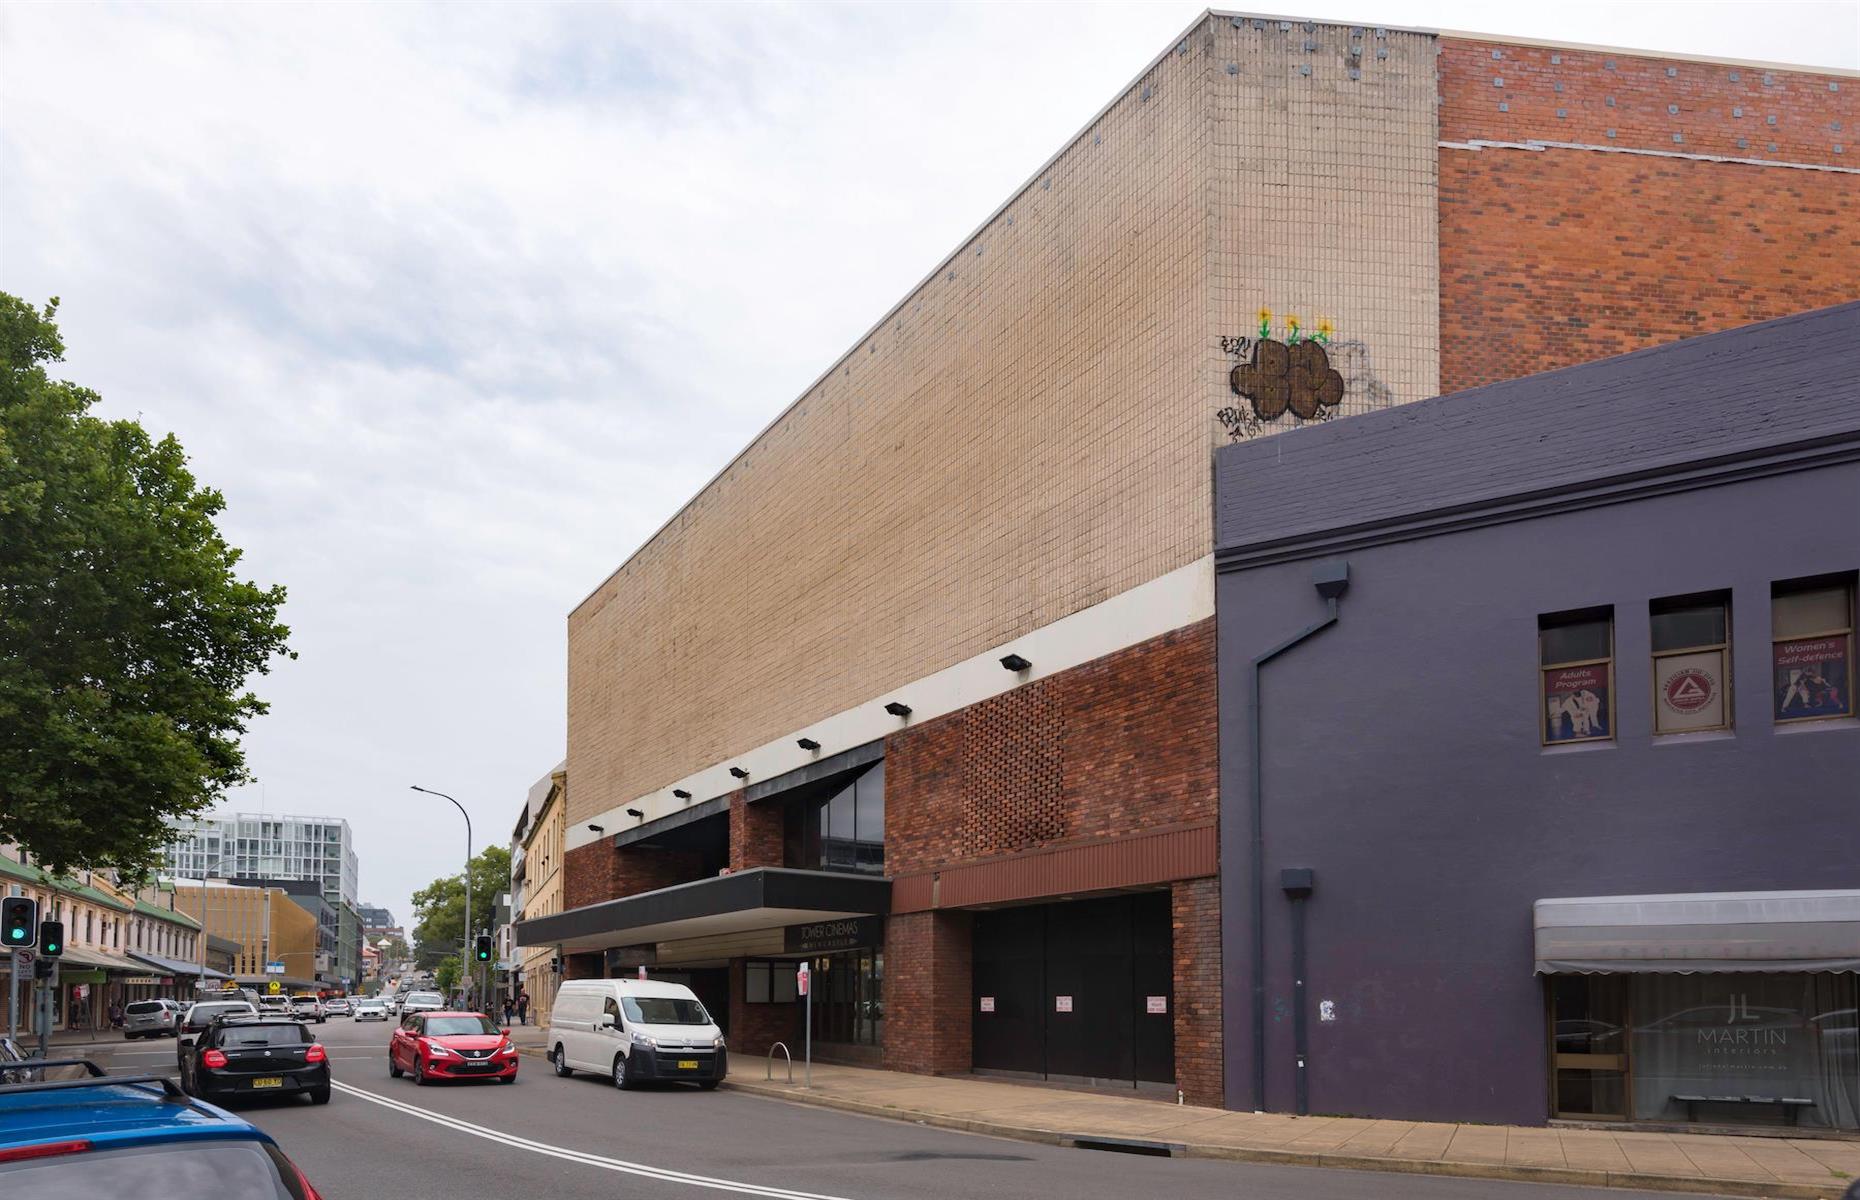 <p>Despite being boarded up since 2018, Newcastle’s Tower Cinemas is still much missed by the community with <a href="https://www.facebook.com/savetowercinemas/">calls to reopen the space as a cinema</a>. The three-screen venue, which opened in the coastal city in 1976, was a much-loved local cinema, host of film festivals and known for screening independent and foreign movies in its latter years. But dwindling customers led to Event Cinemas closing the place. The abandoned building has recently been sold to an unknown buyer.</p>